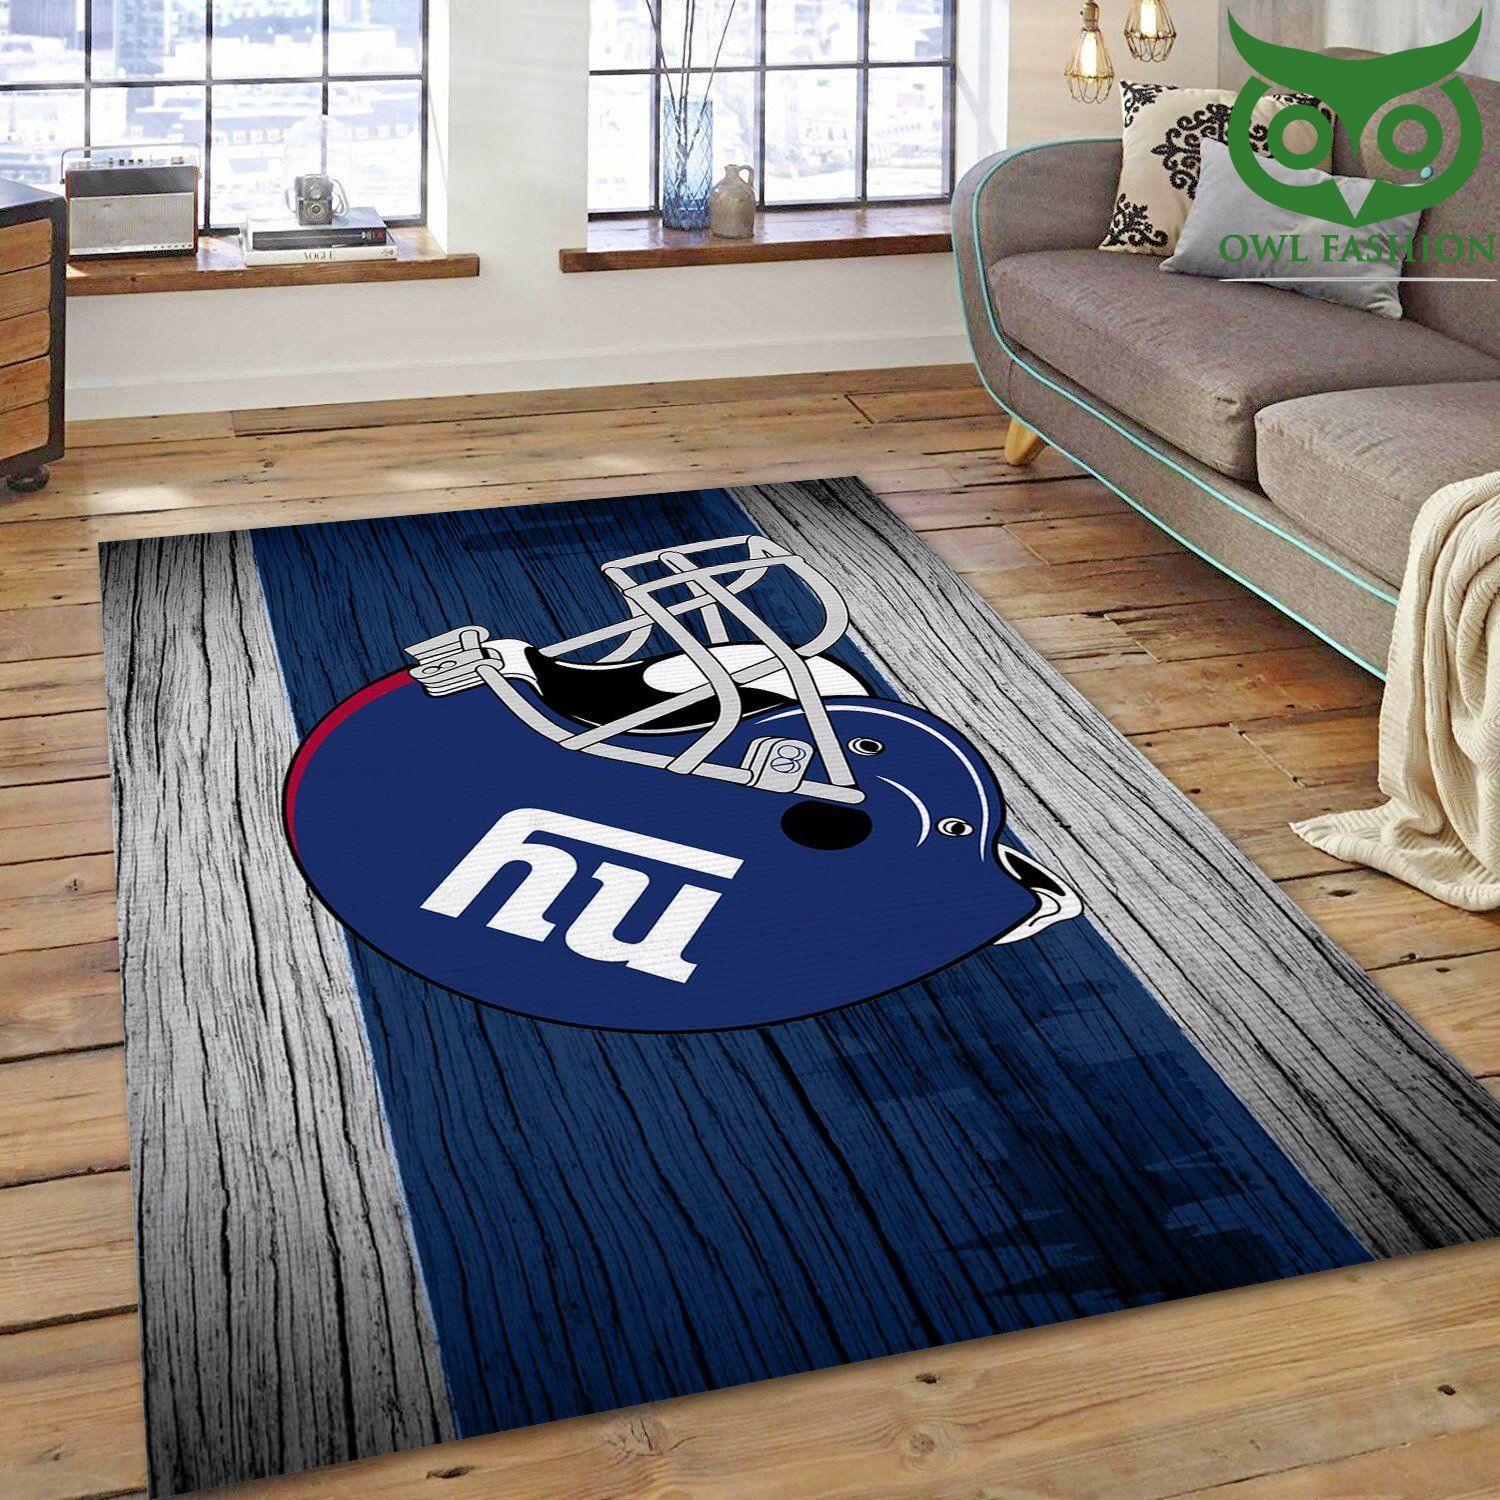 New York Giants Nfl Area carpet rug Home and floor Decoration